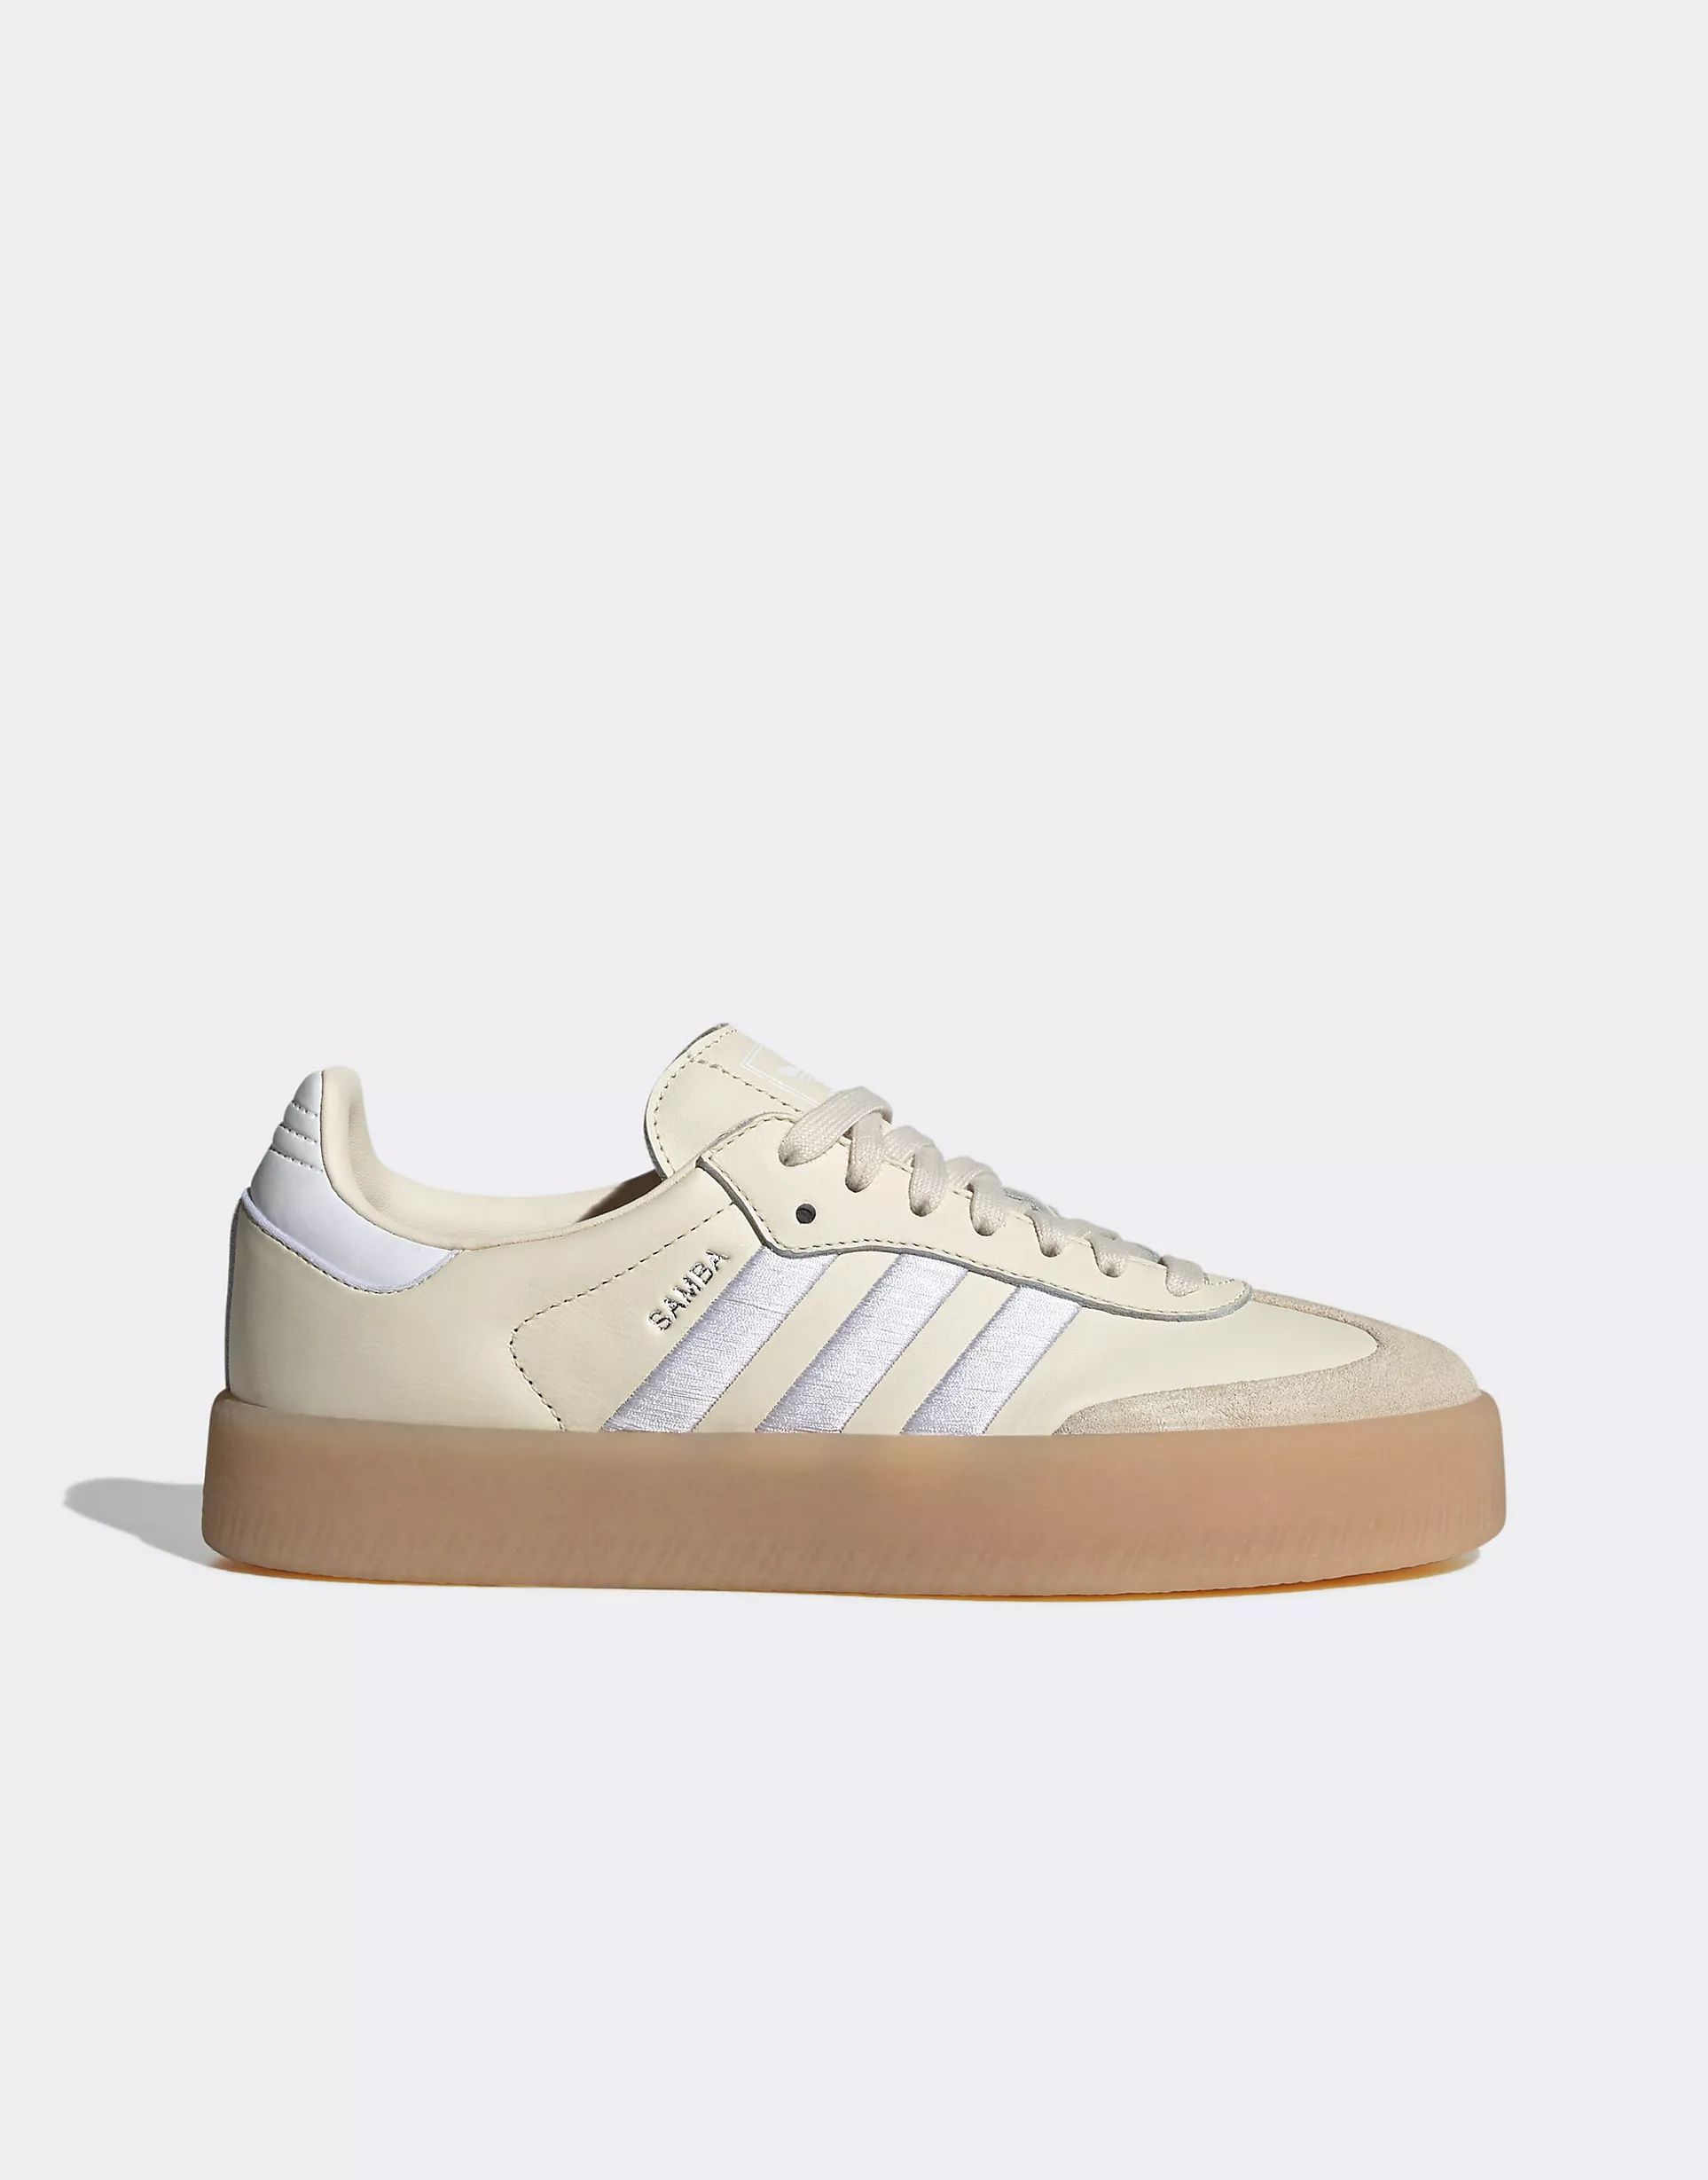 adidas Originals Sambae sneakers in beige and white with rubber sole | ASOS (Global)